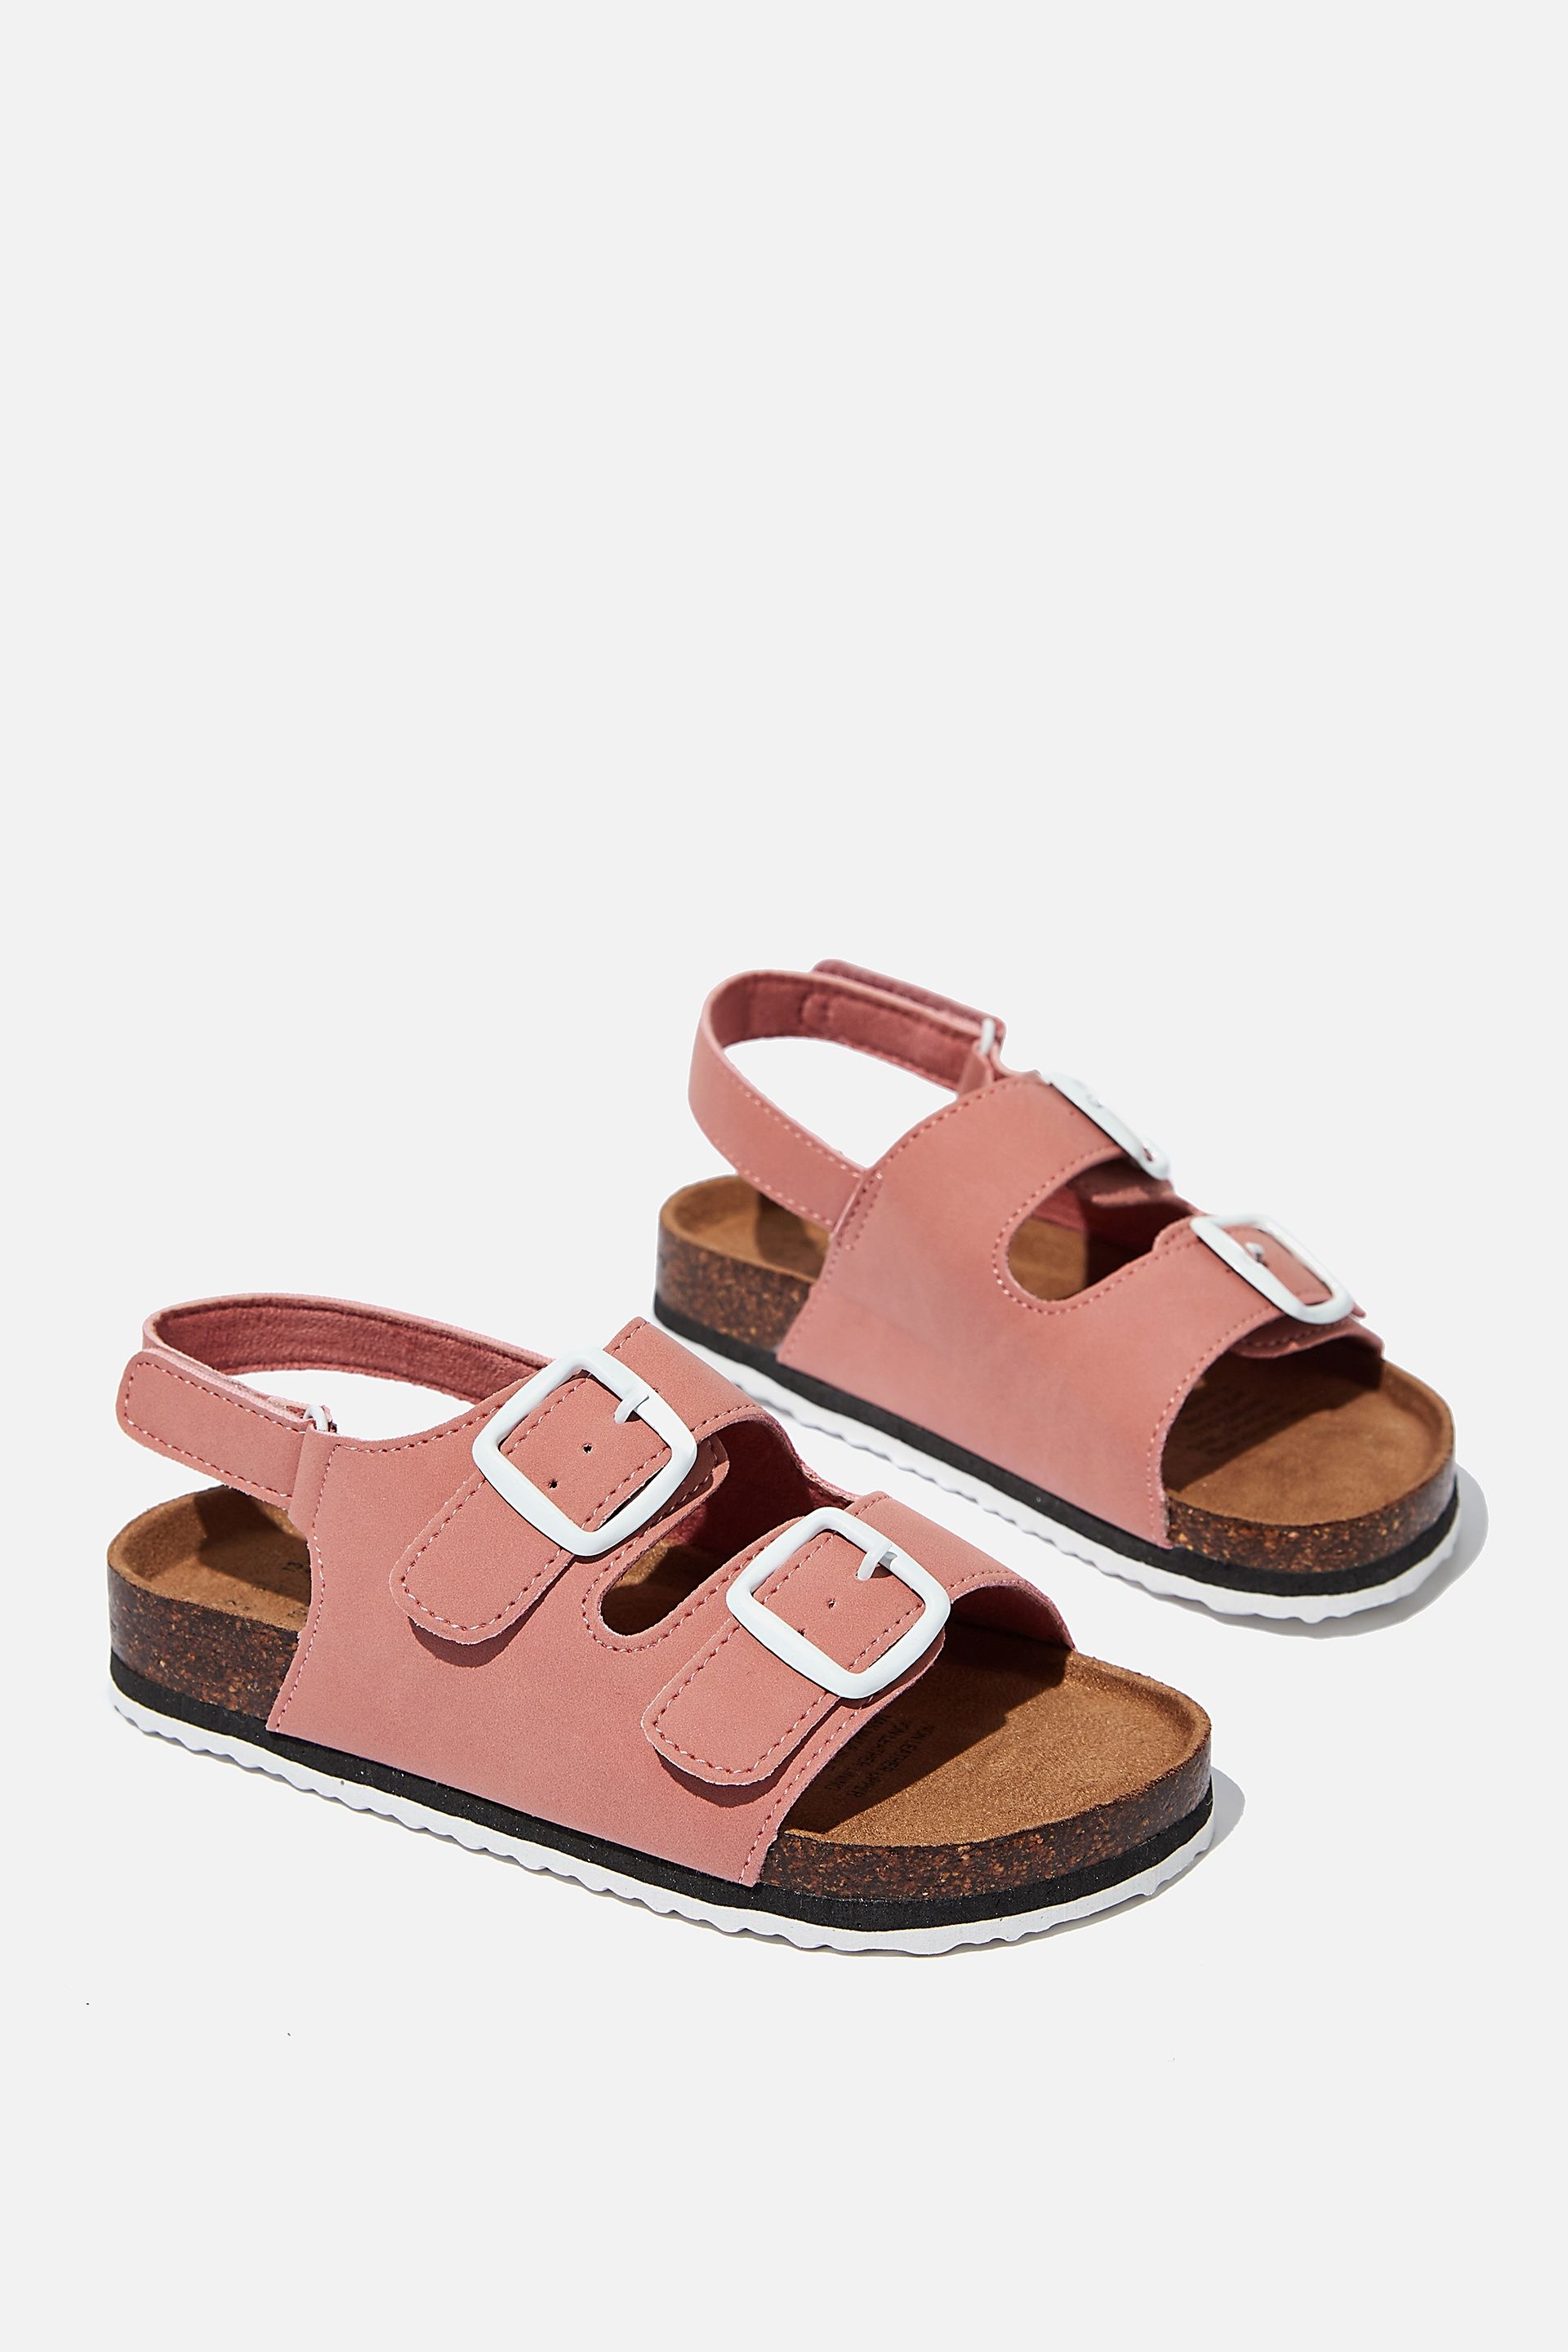 Theo Sandal | Cotton On (ANZ)